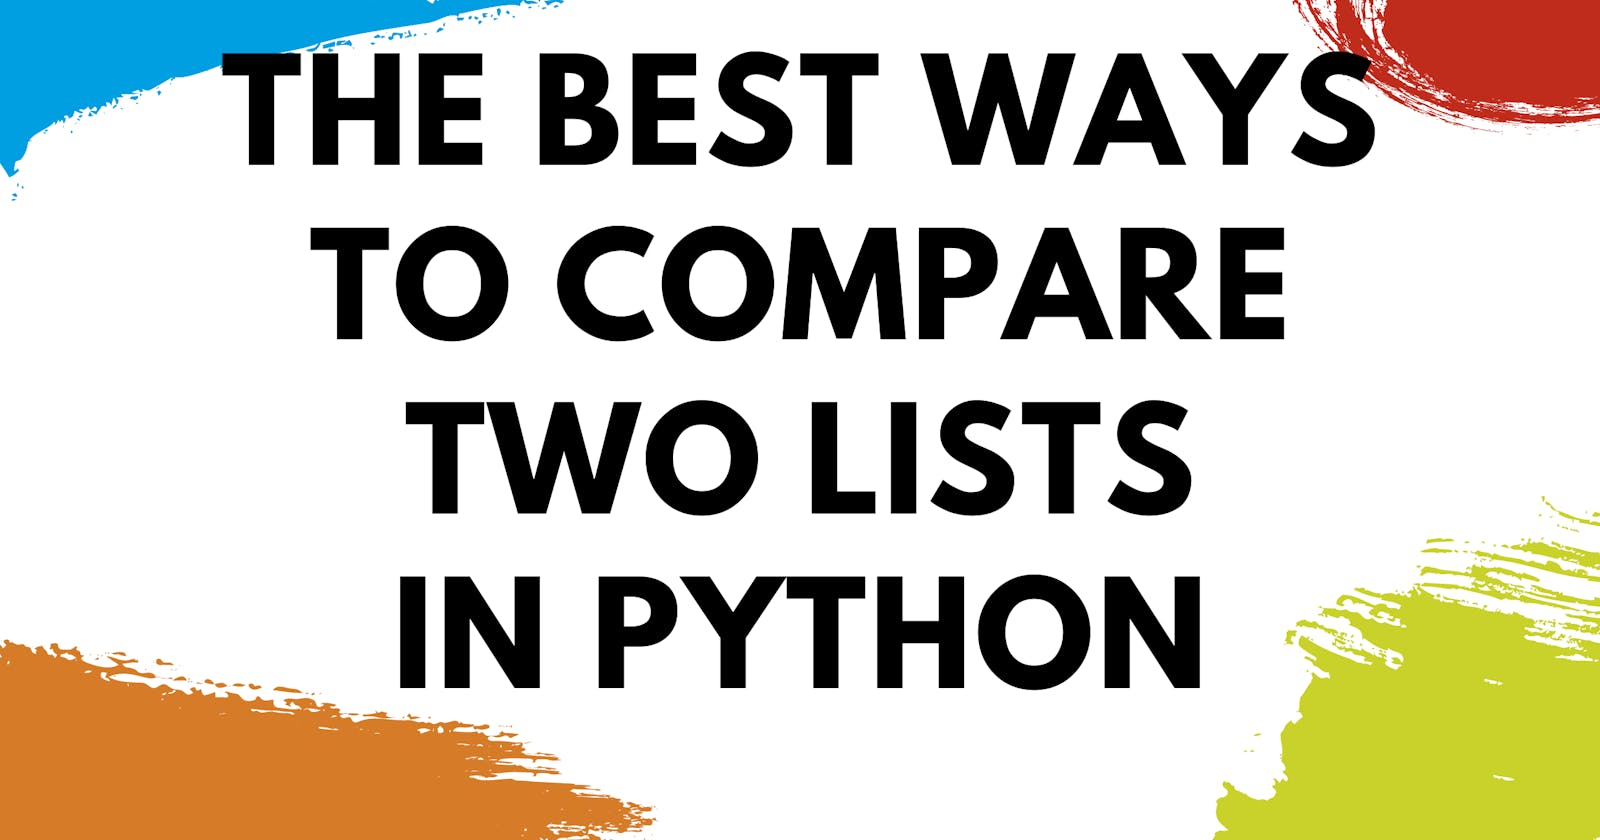 The Best Ways to Compare Two Lists in Python